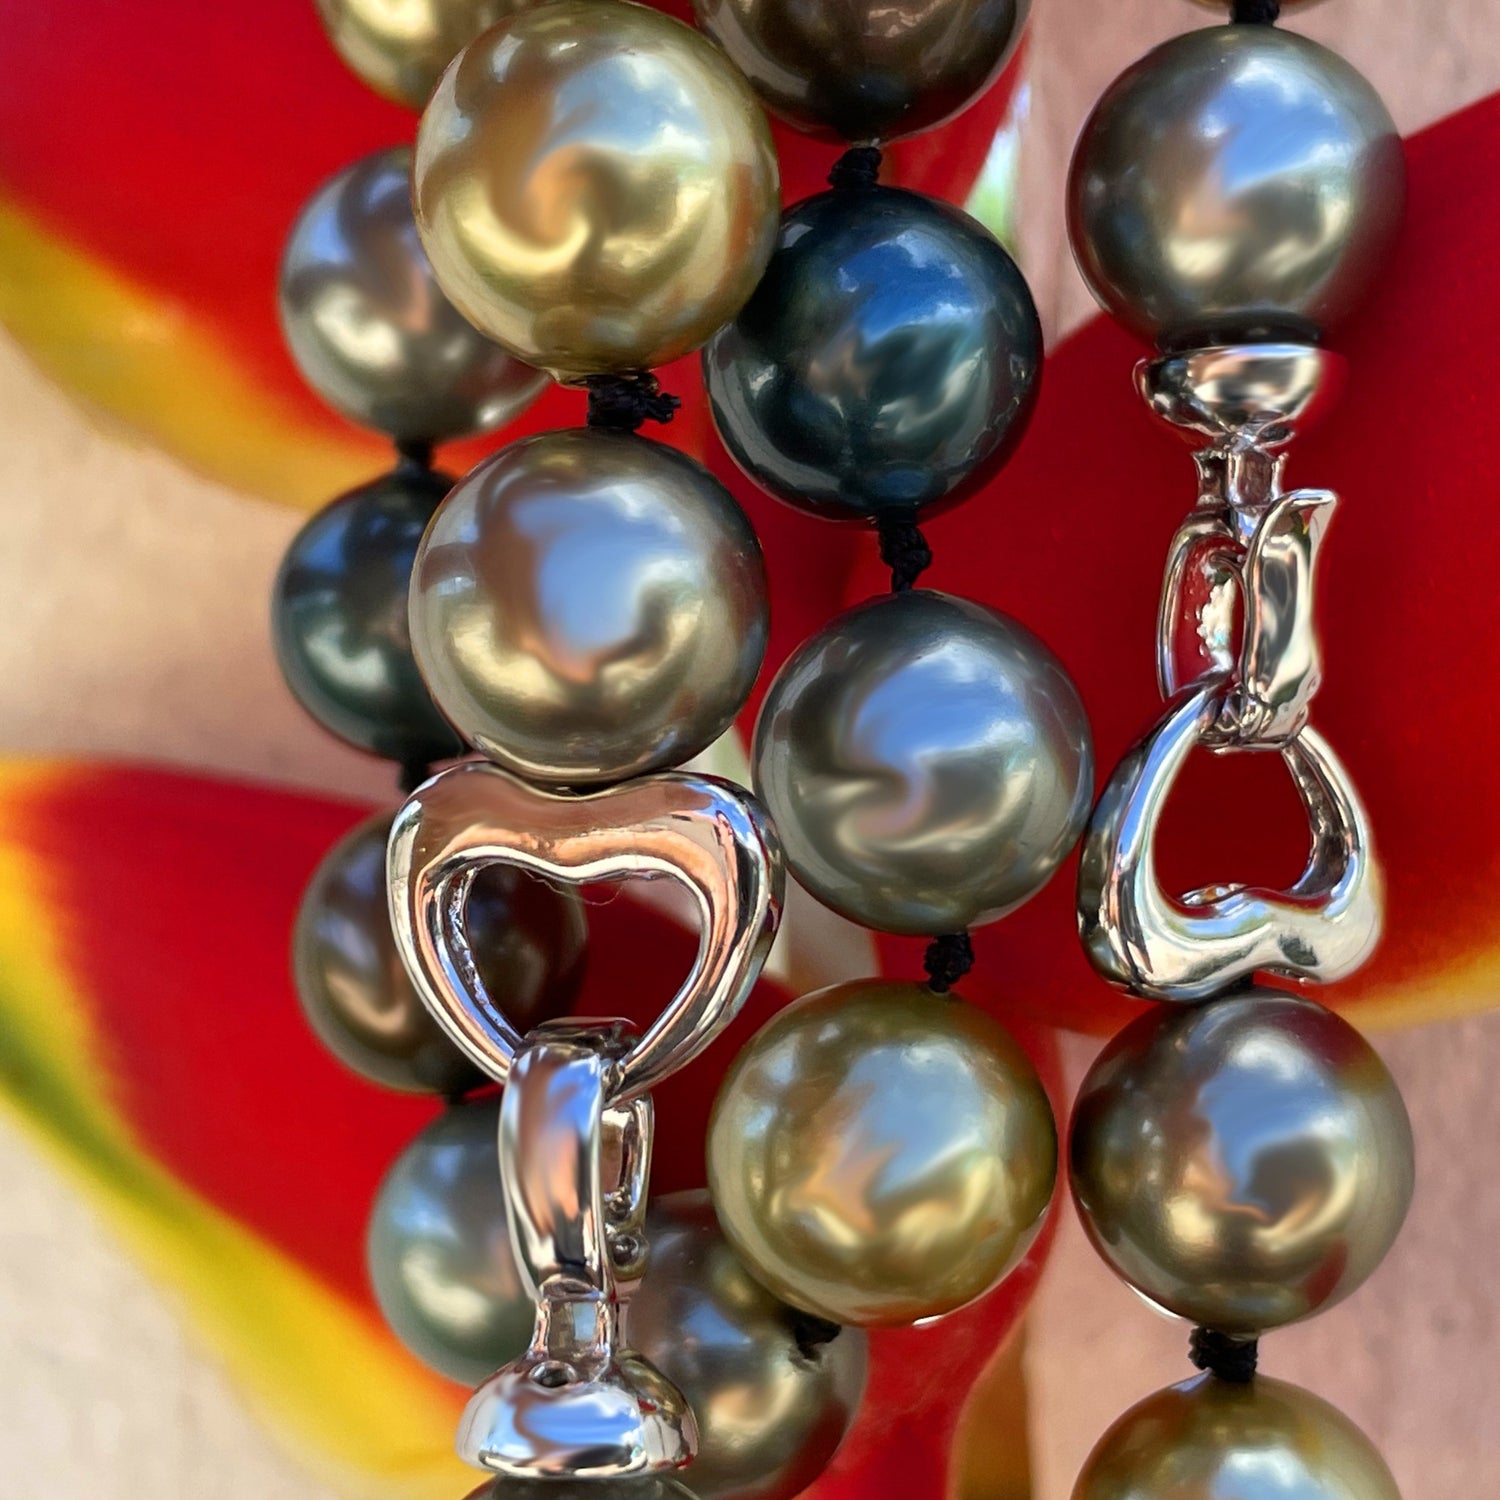 Momi Tahitian Colors Shell Pearl Necklace and Bracelet Combo